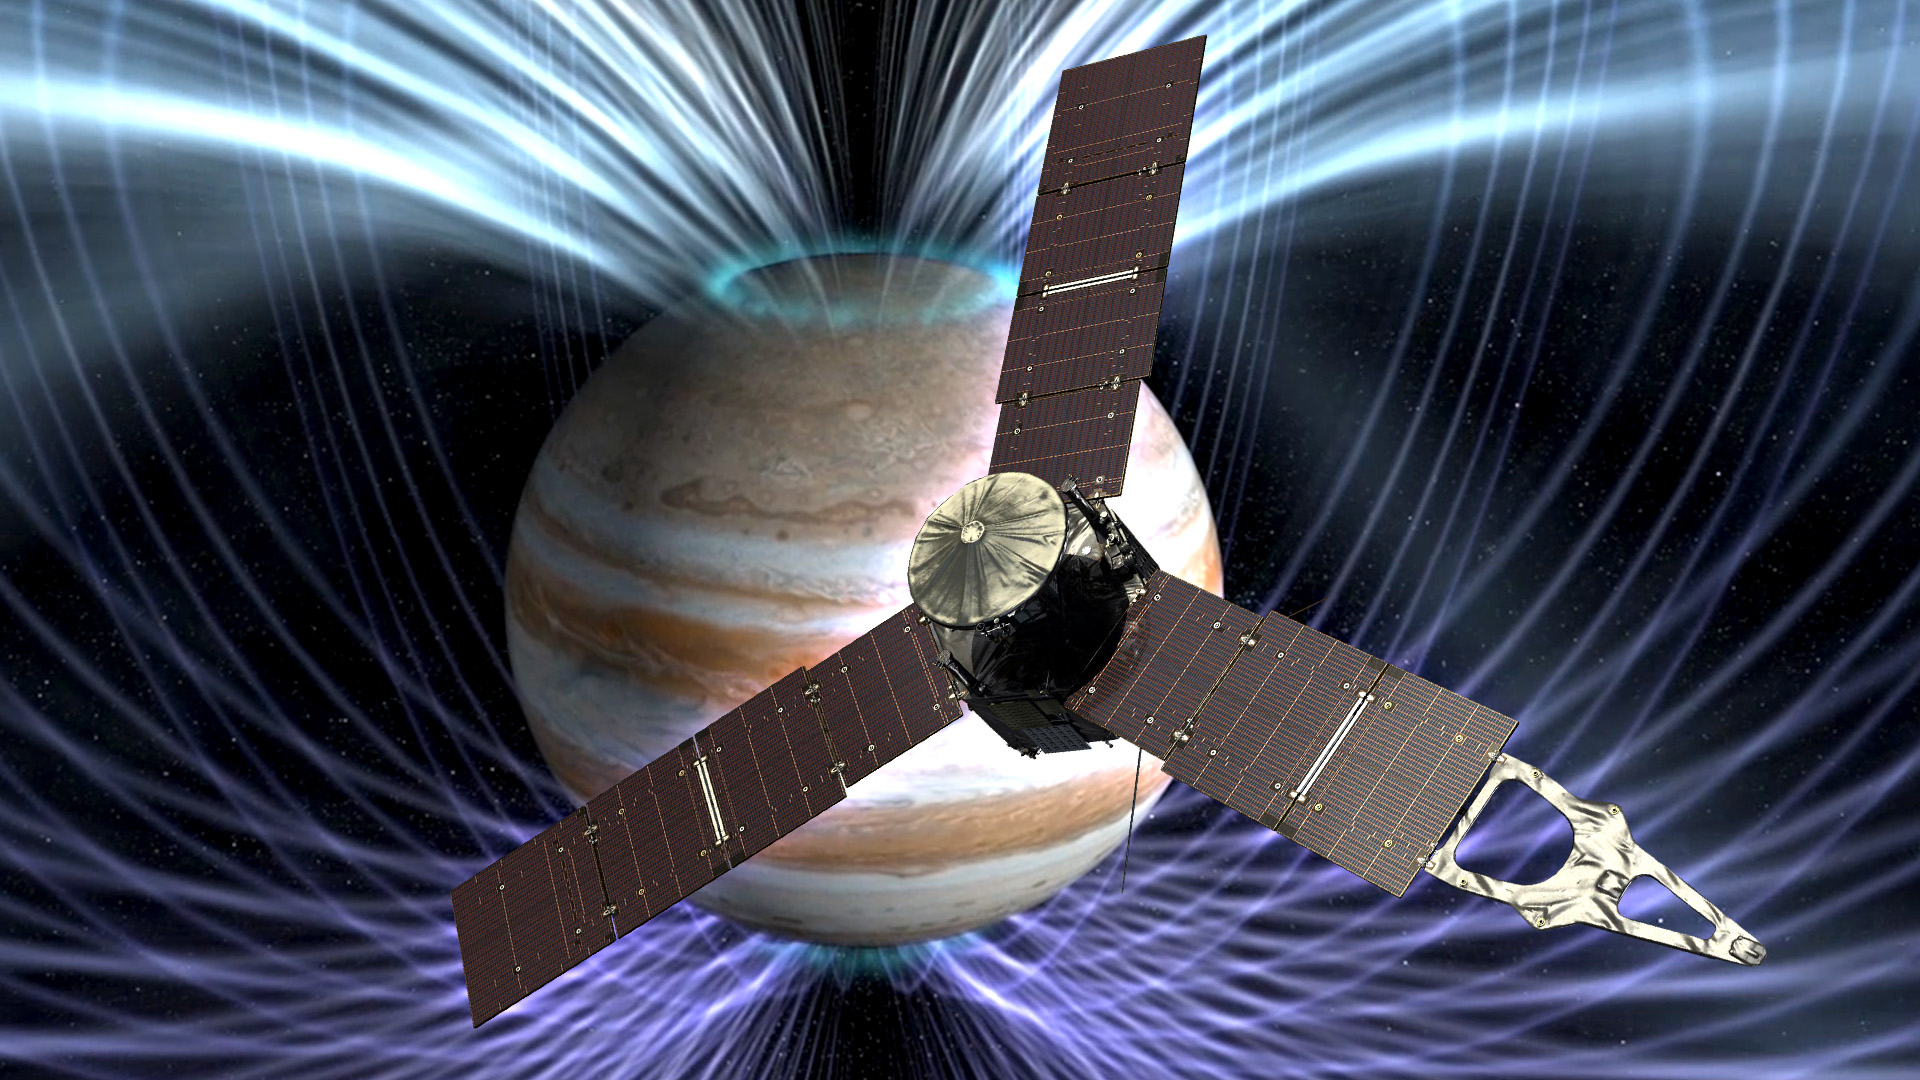 Preview Image for Exploring Jupiter's Magnetic Field